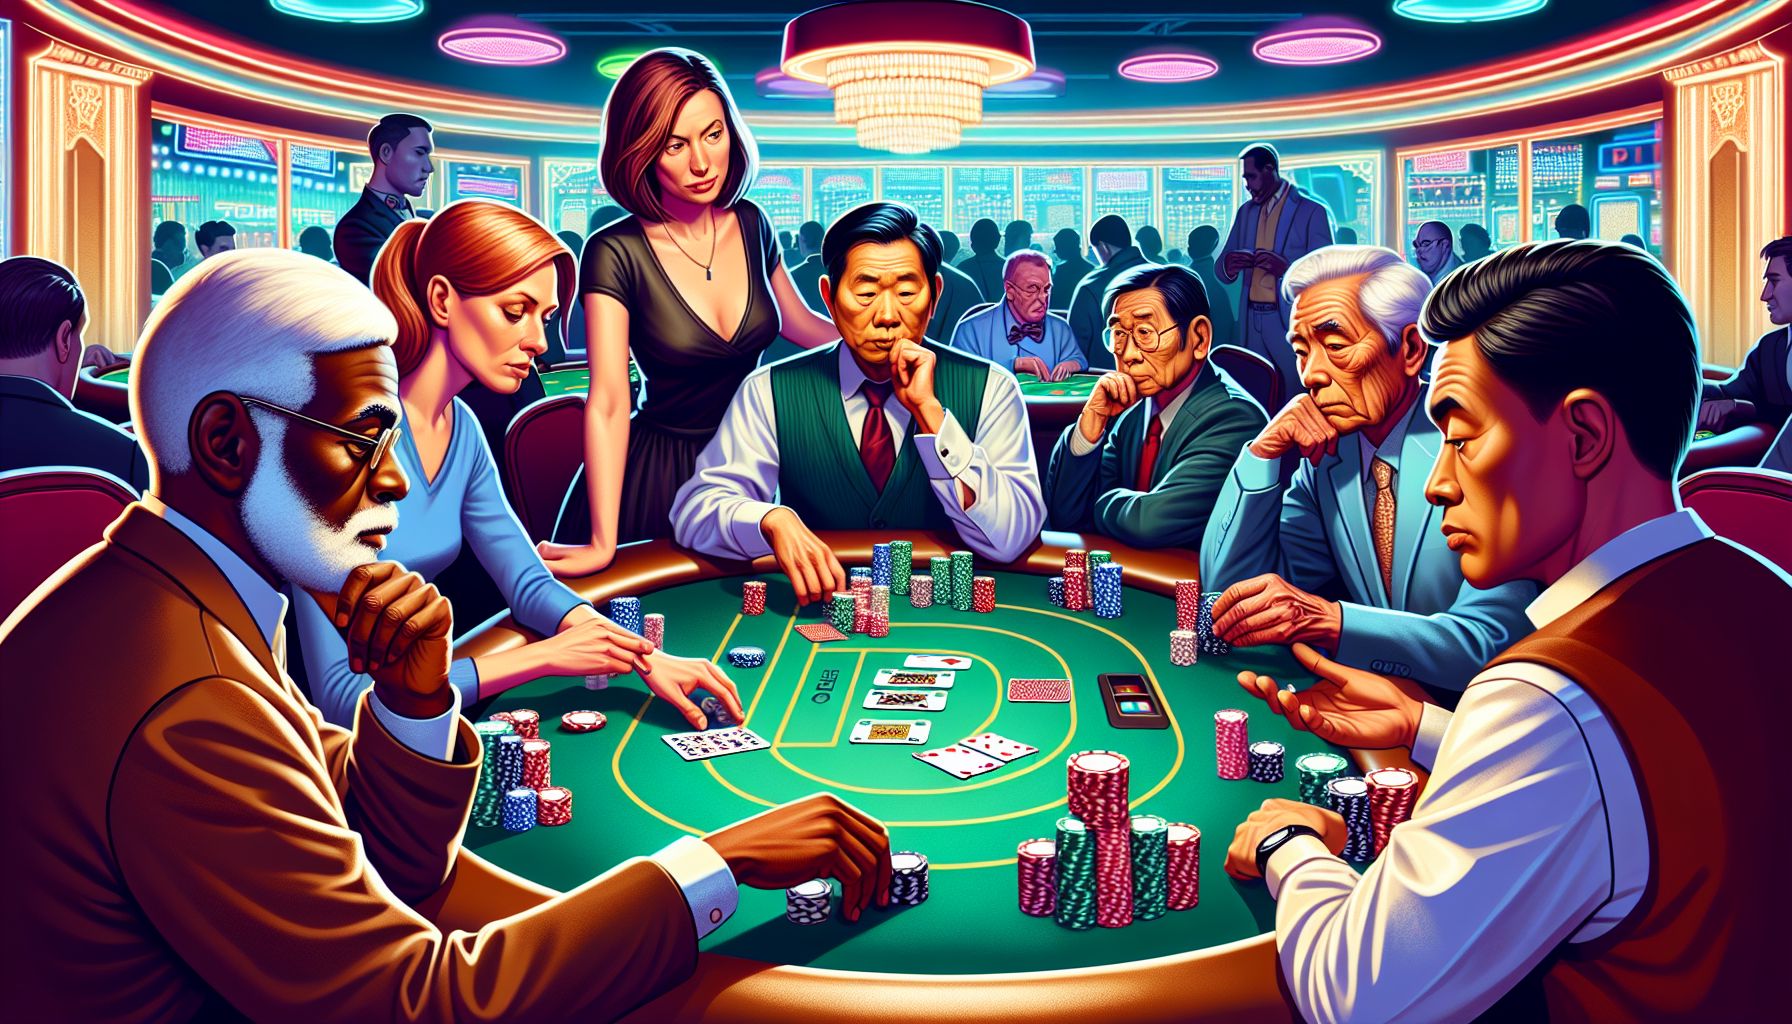 Decoding Poker Tells: How to Gain an Edge at the Casino